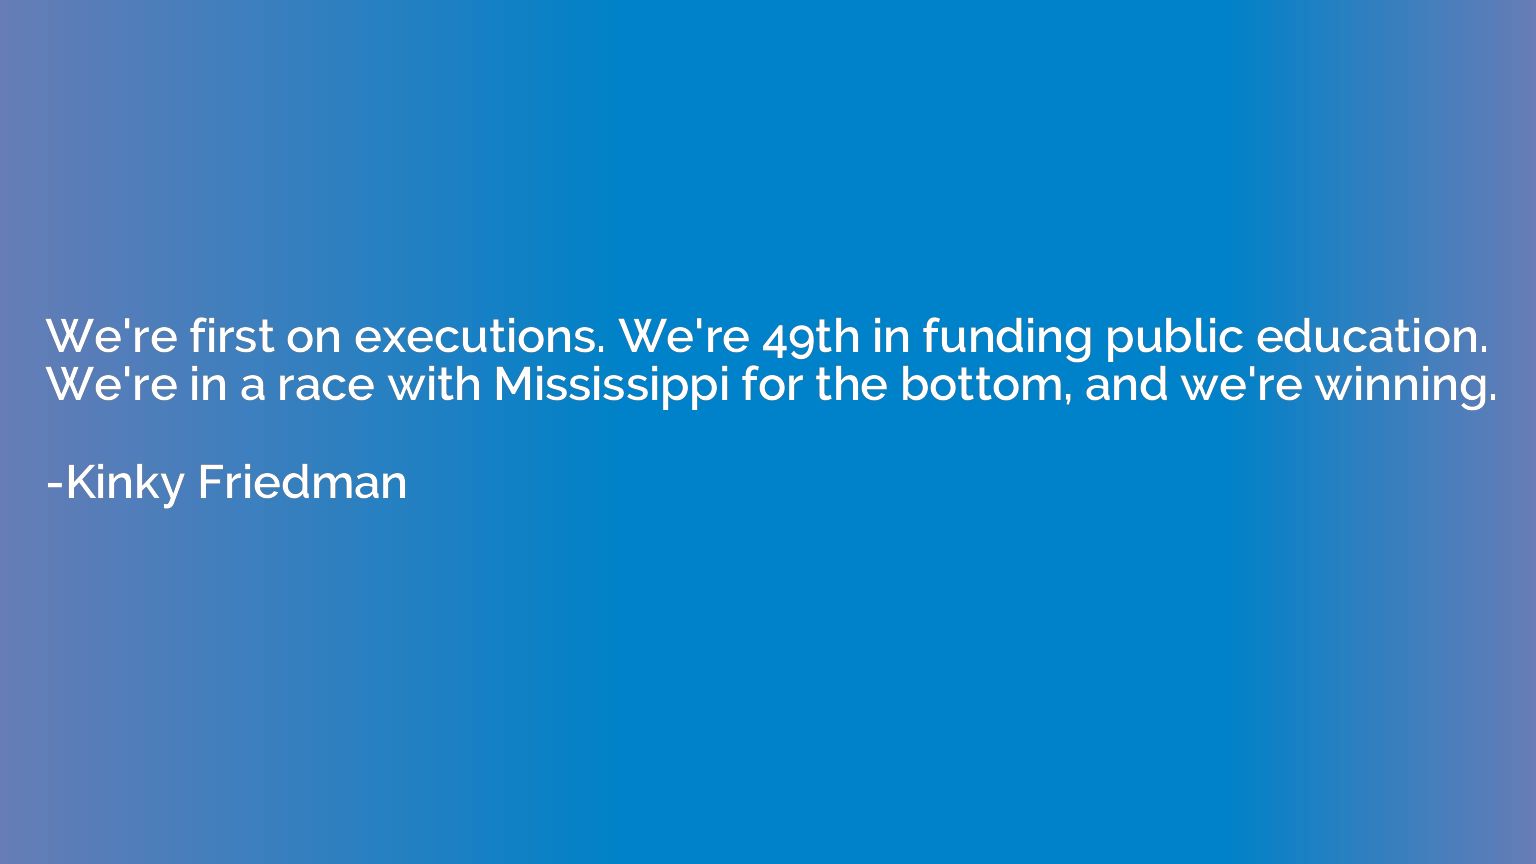 We're first on executions. We're 49th in funding public educ